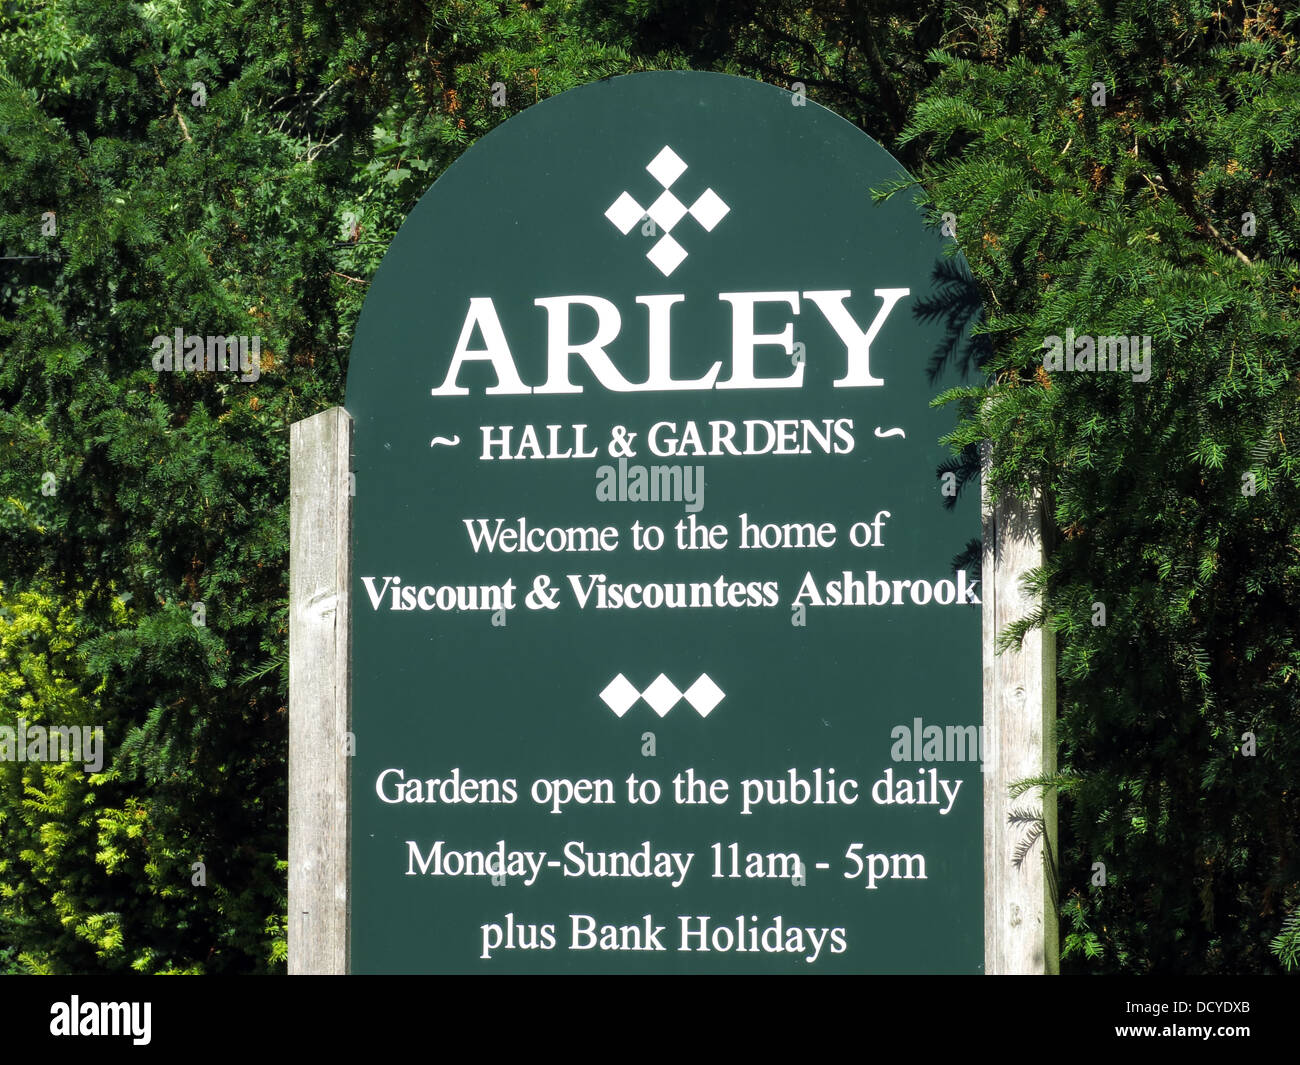 Arley Hall & gardens sign, home of Viscount Ashbrook and Viscountess Ashbrook, between Warrington and Northwich, Cheshire, England, UK, Stock Photo